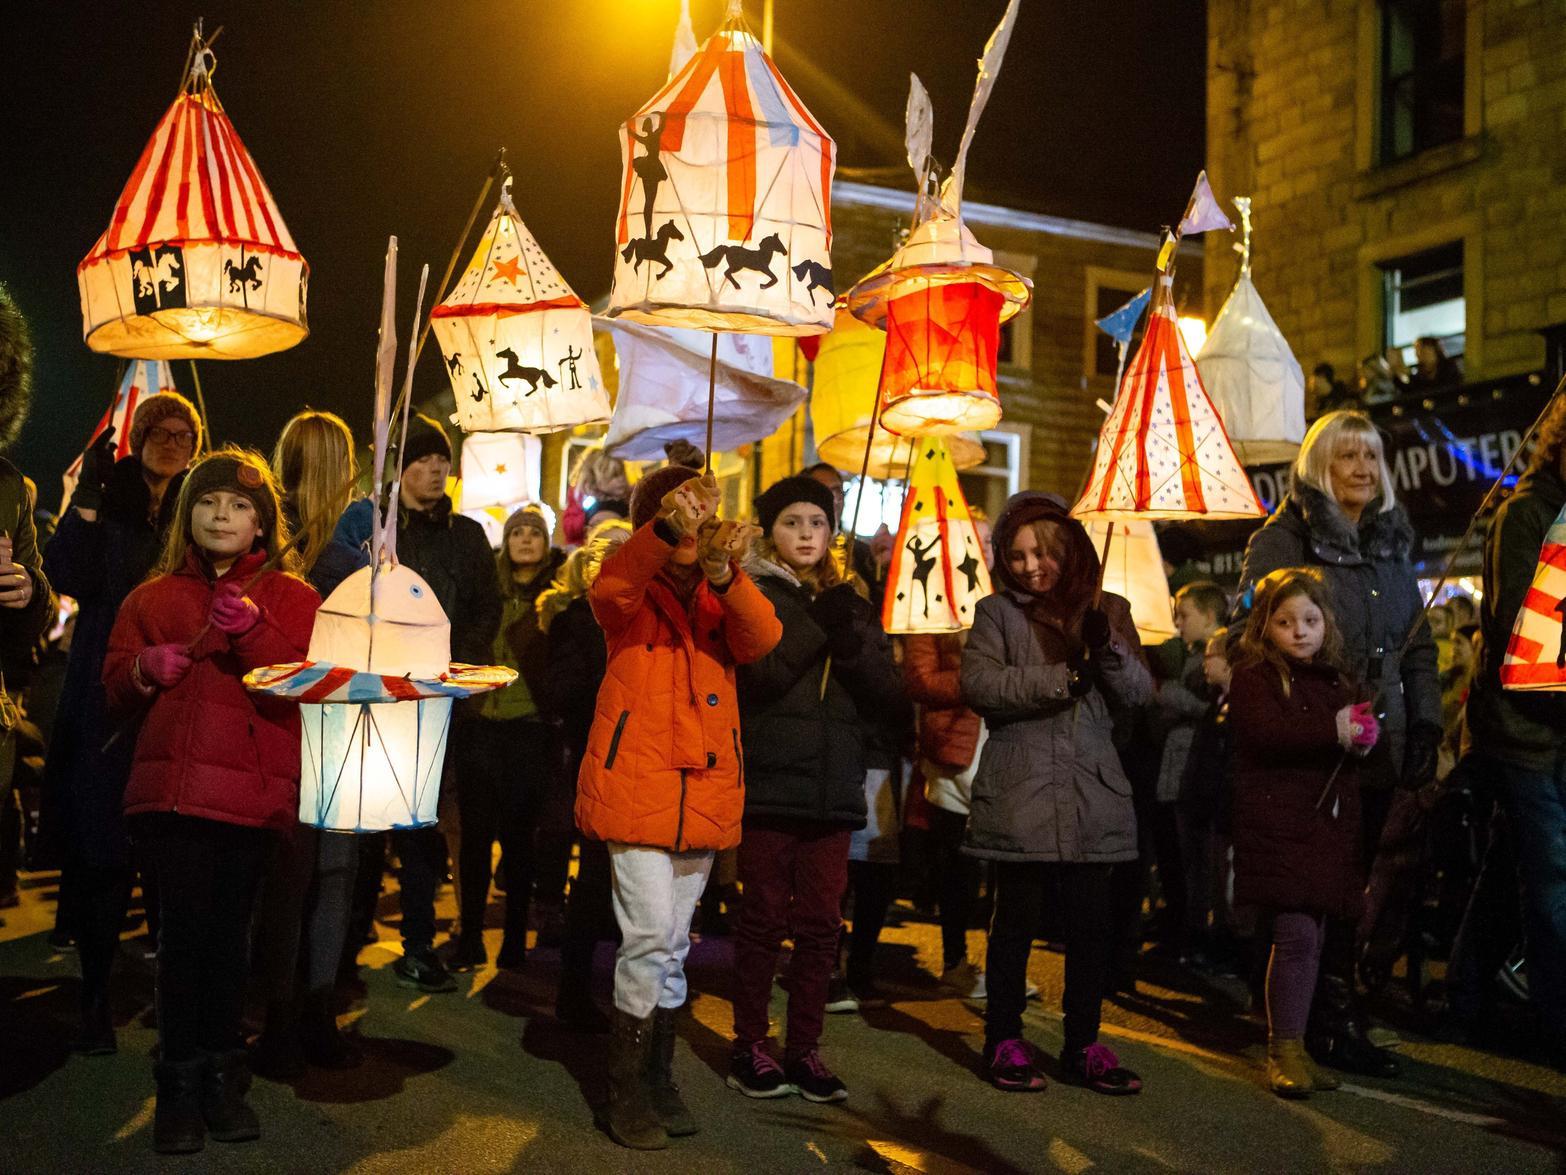 Fingers crossed at the end of the year there will be the return of Todmorden Lamplighters Festival. The event didnt take place in 2019 due to growing its venue so organisers were on the lookout for the perfect place for a return in 2020.